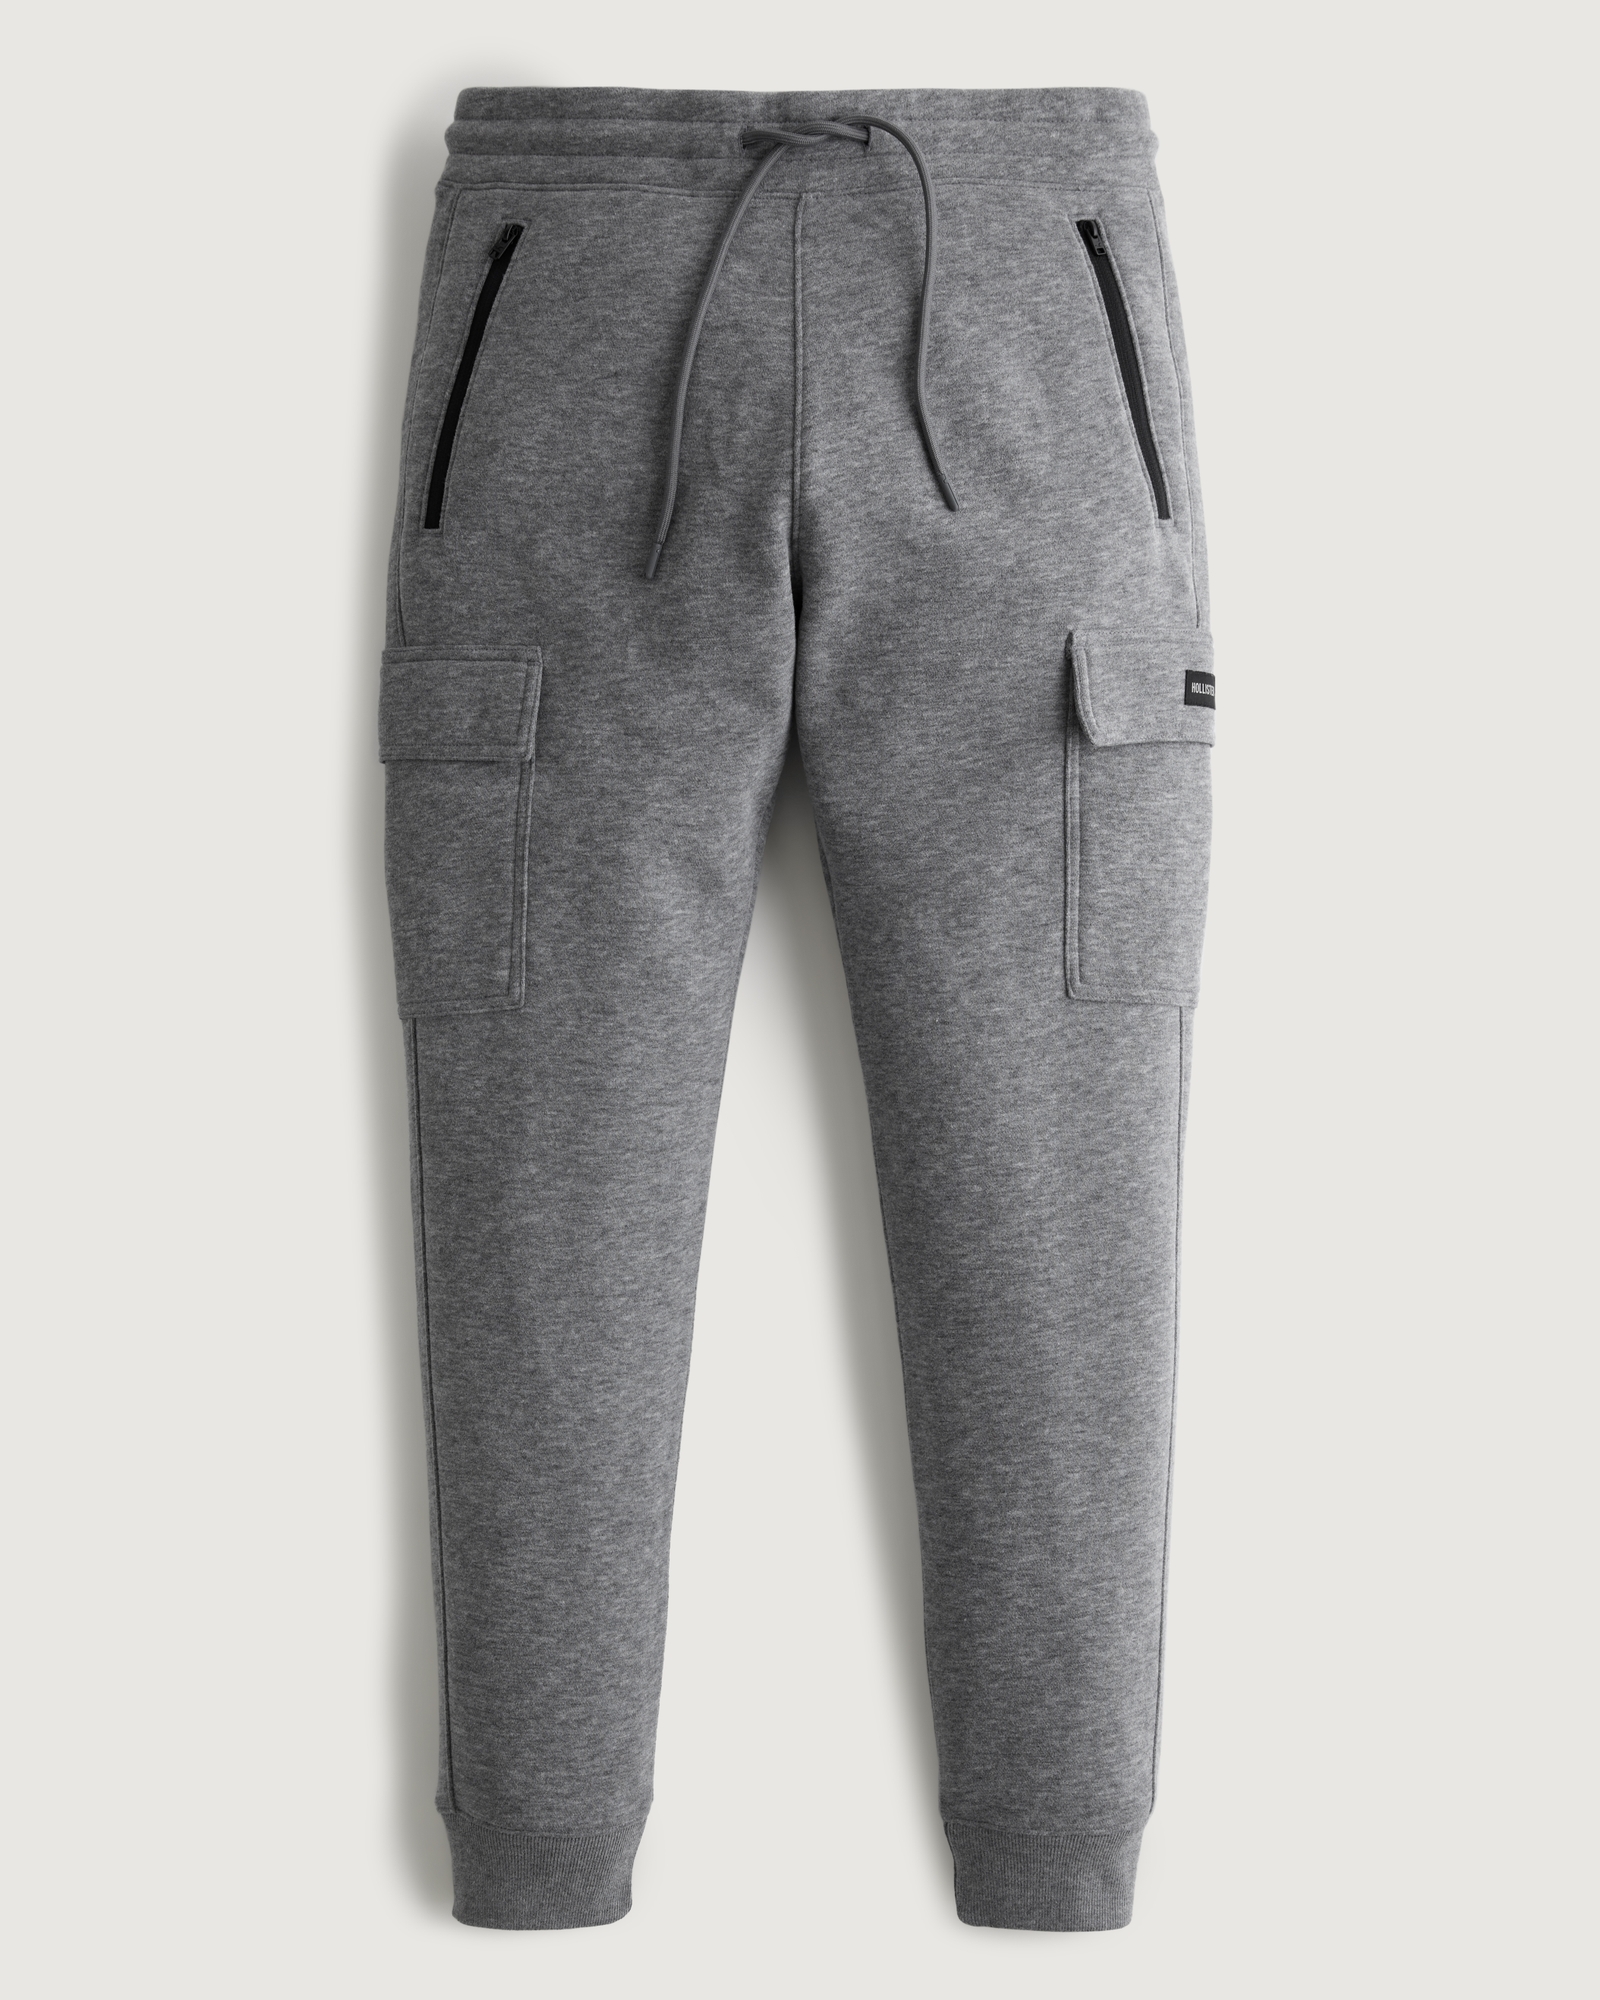 Hollister Marled Gray Sweatpants Size S - 52% off